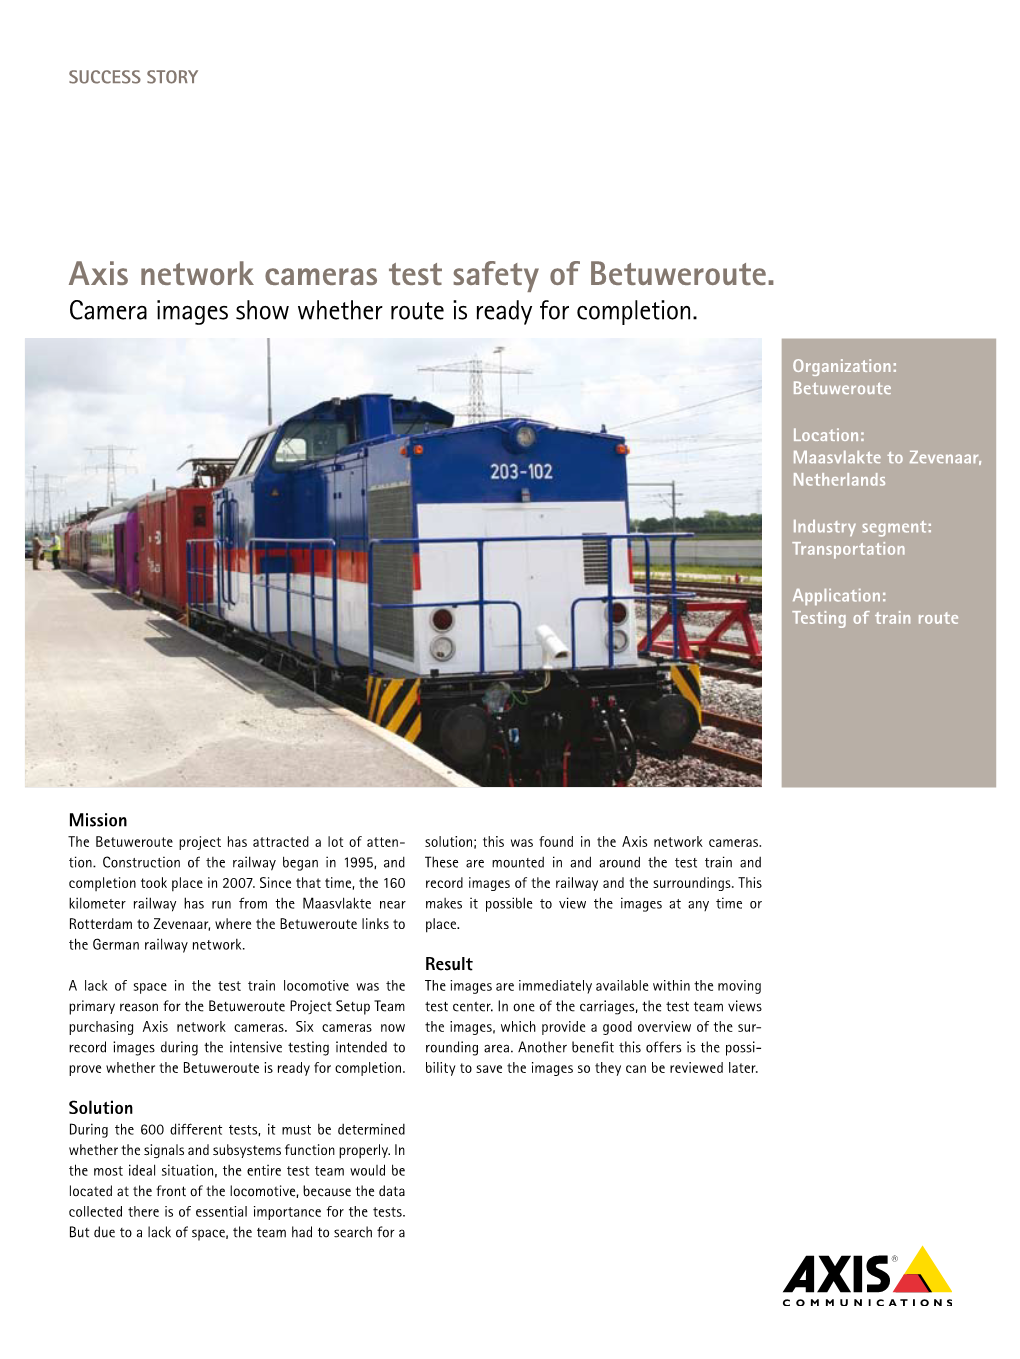 Axis Network Cameras Test Safety of Betuweroute. Camera Images Show Whether Route Is Ready for Completion